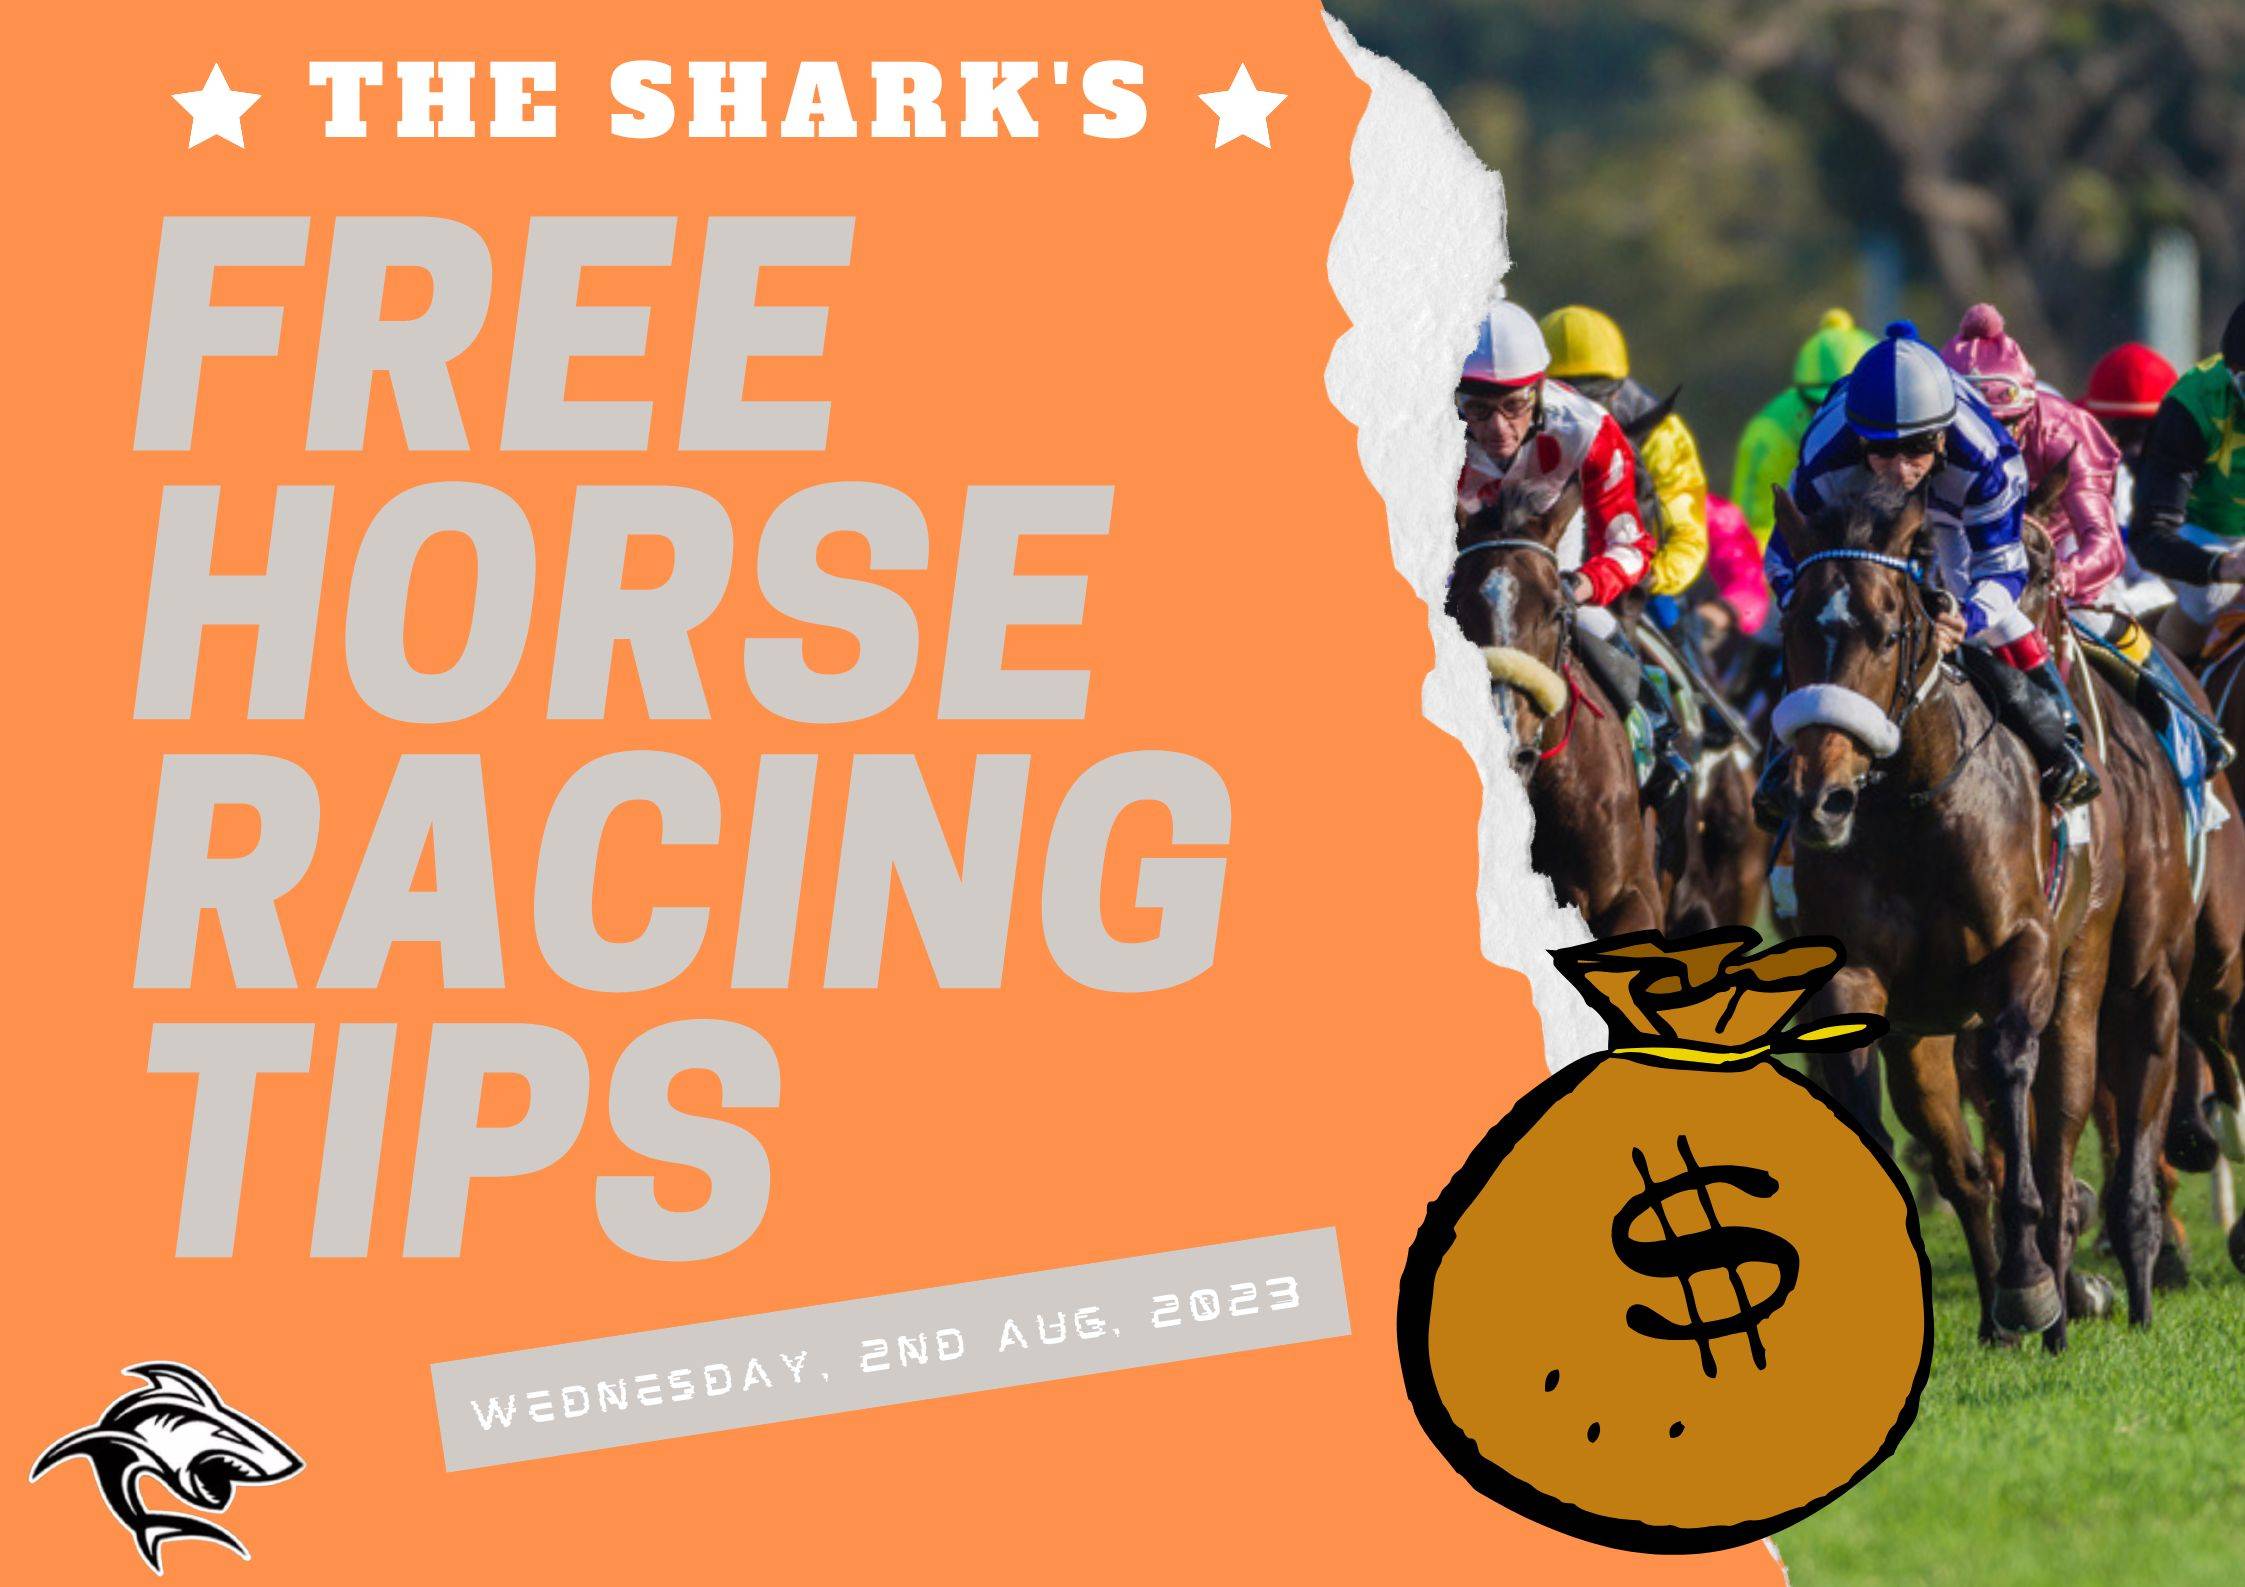 Free Horse Racing Tips - 2nd Aug